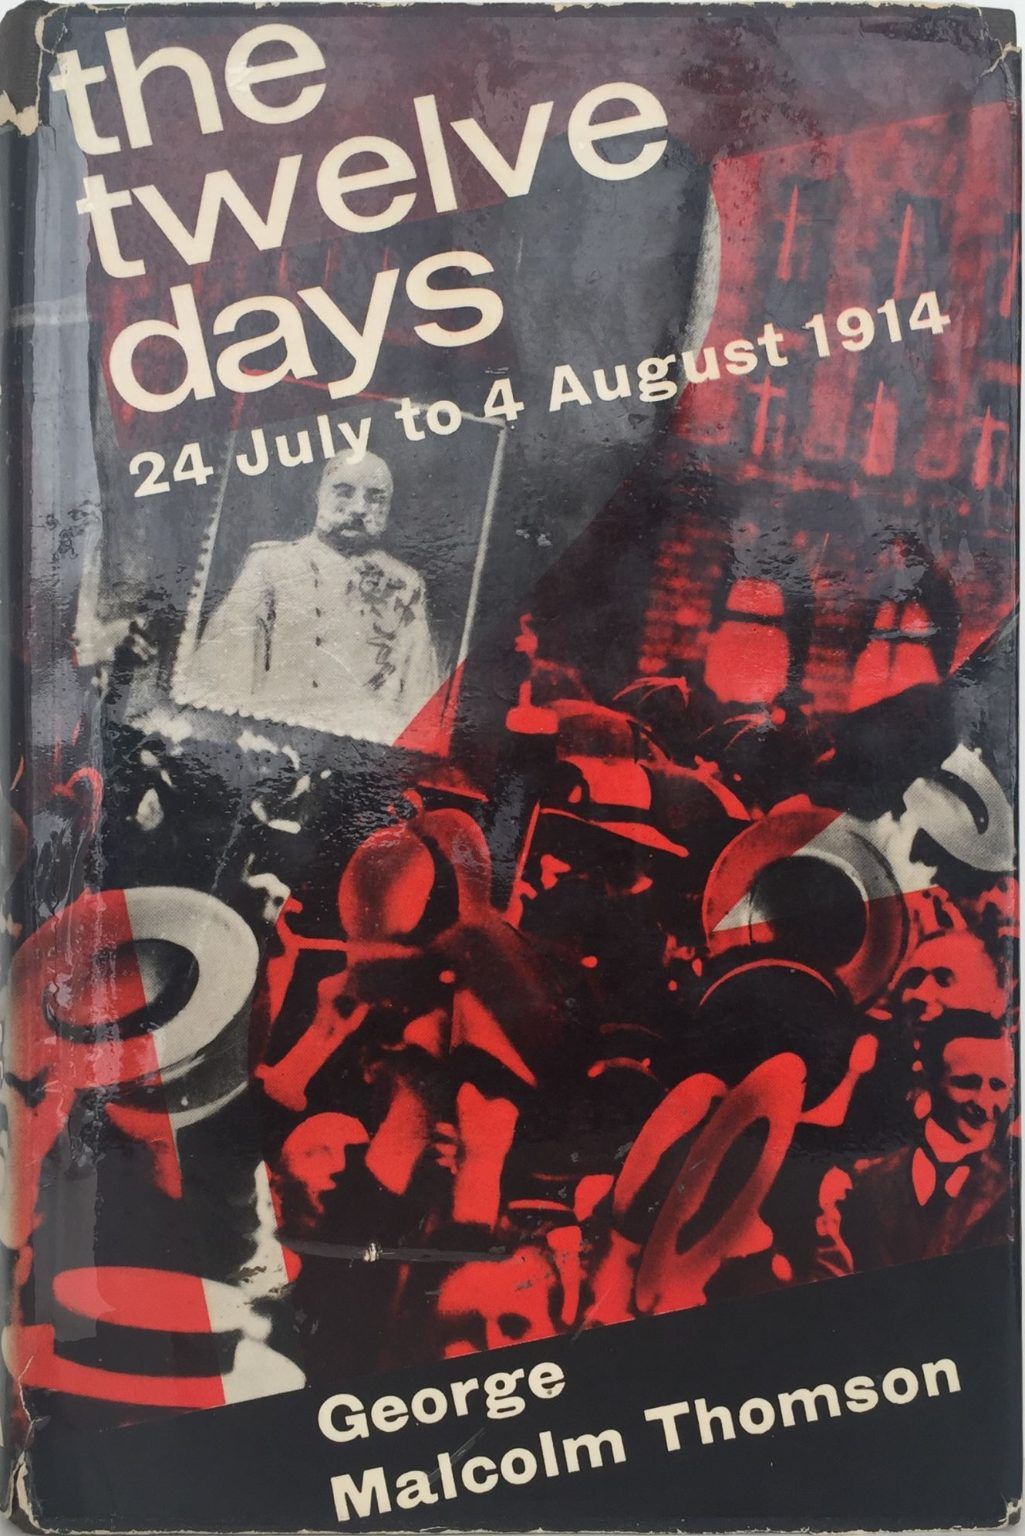 THE TWELVE DAYS: 24 July To 4 August 1914